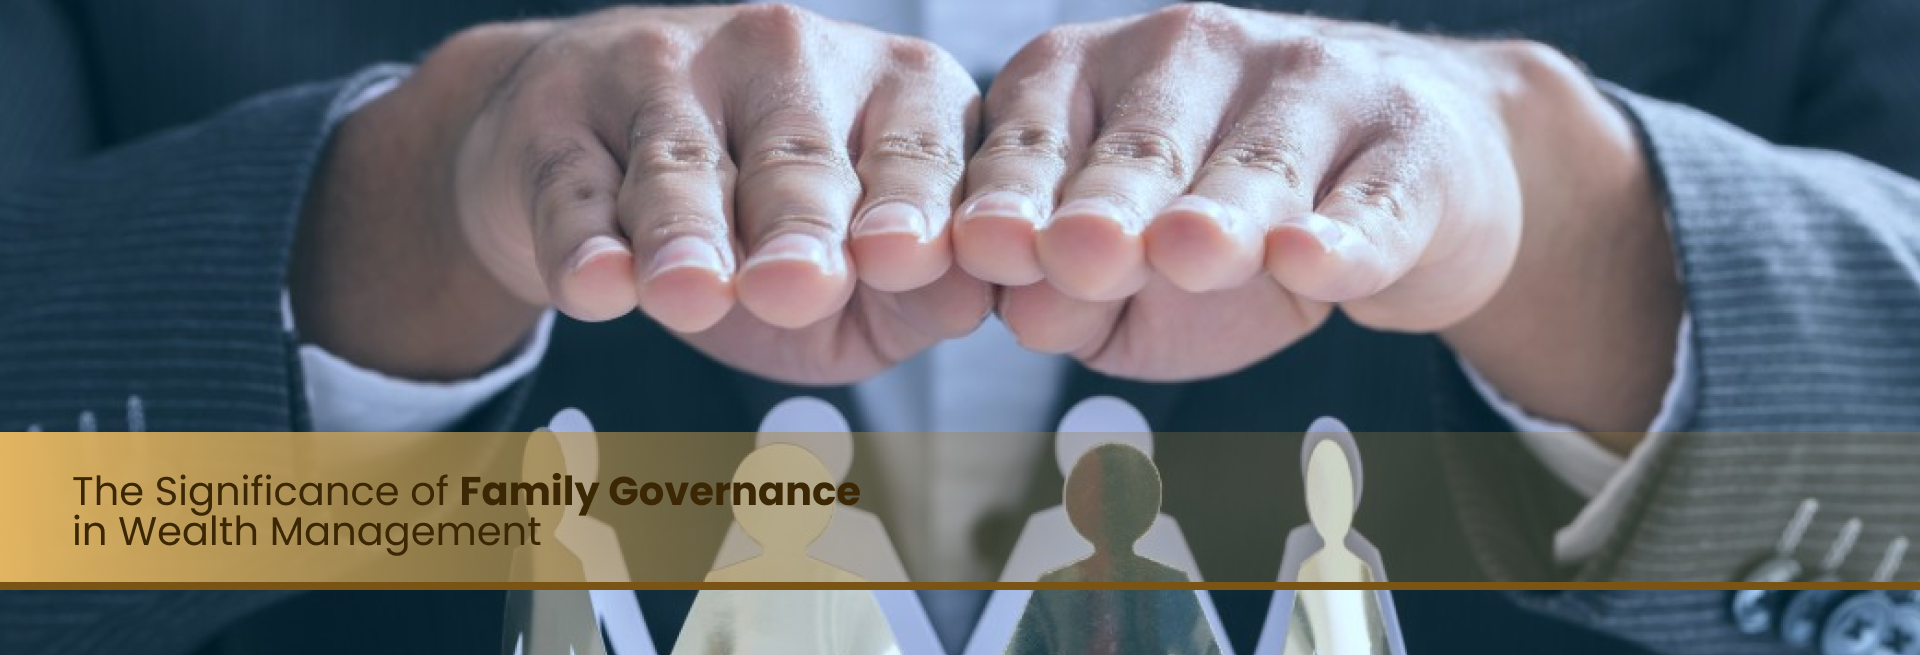 The Significance of Family Governance in Wealth Management